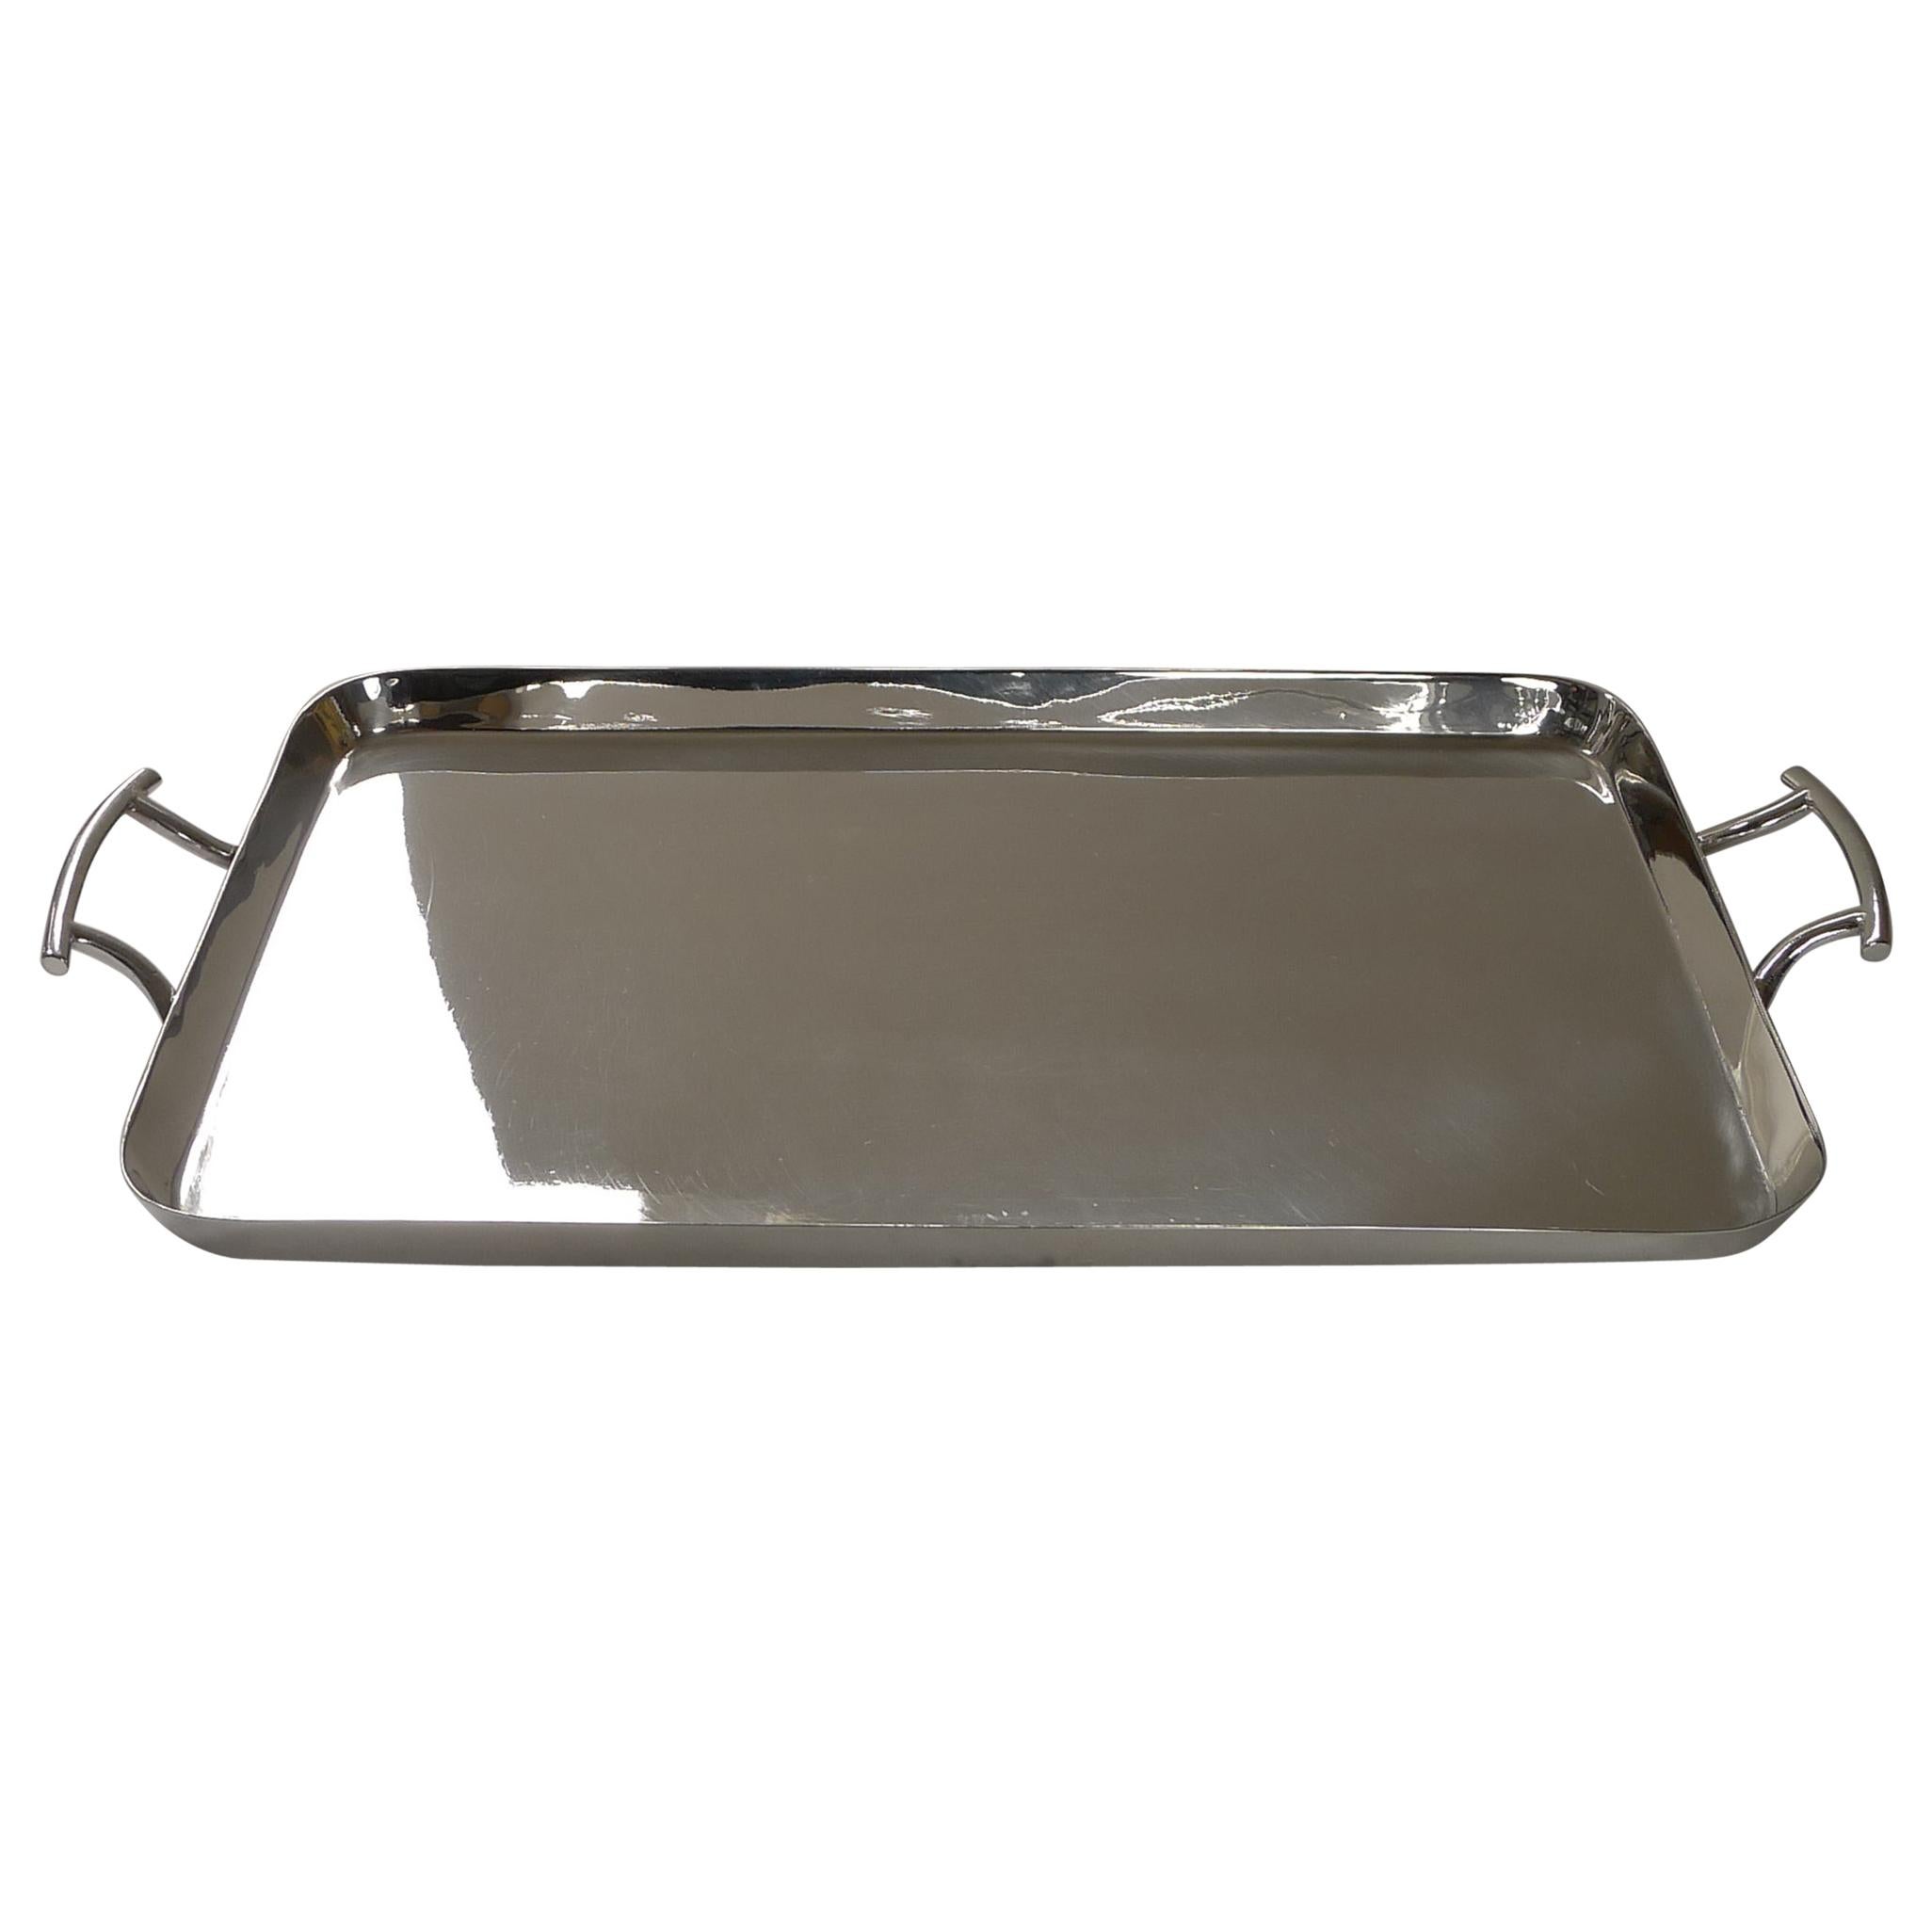 Handsome Art Deco Silver Plated Cocktail Tray by Walker & Hall, c.1930